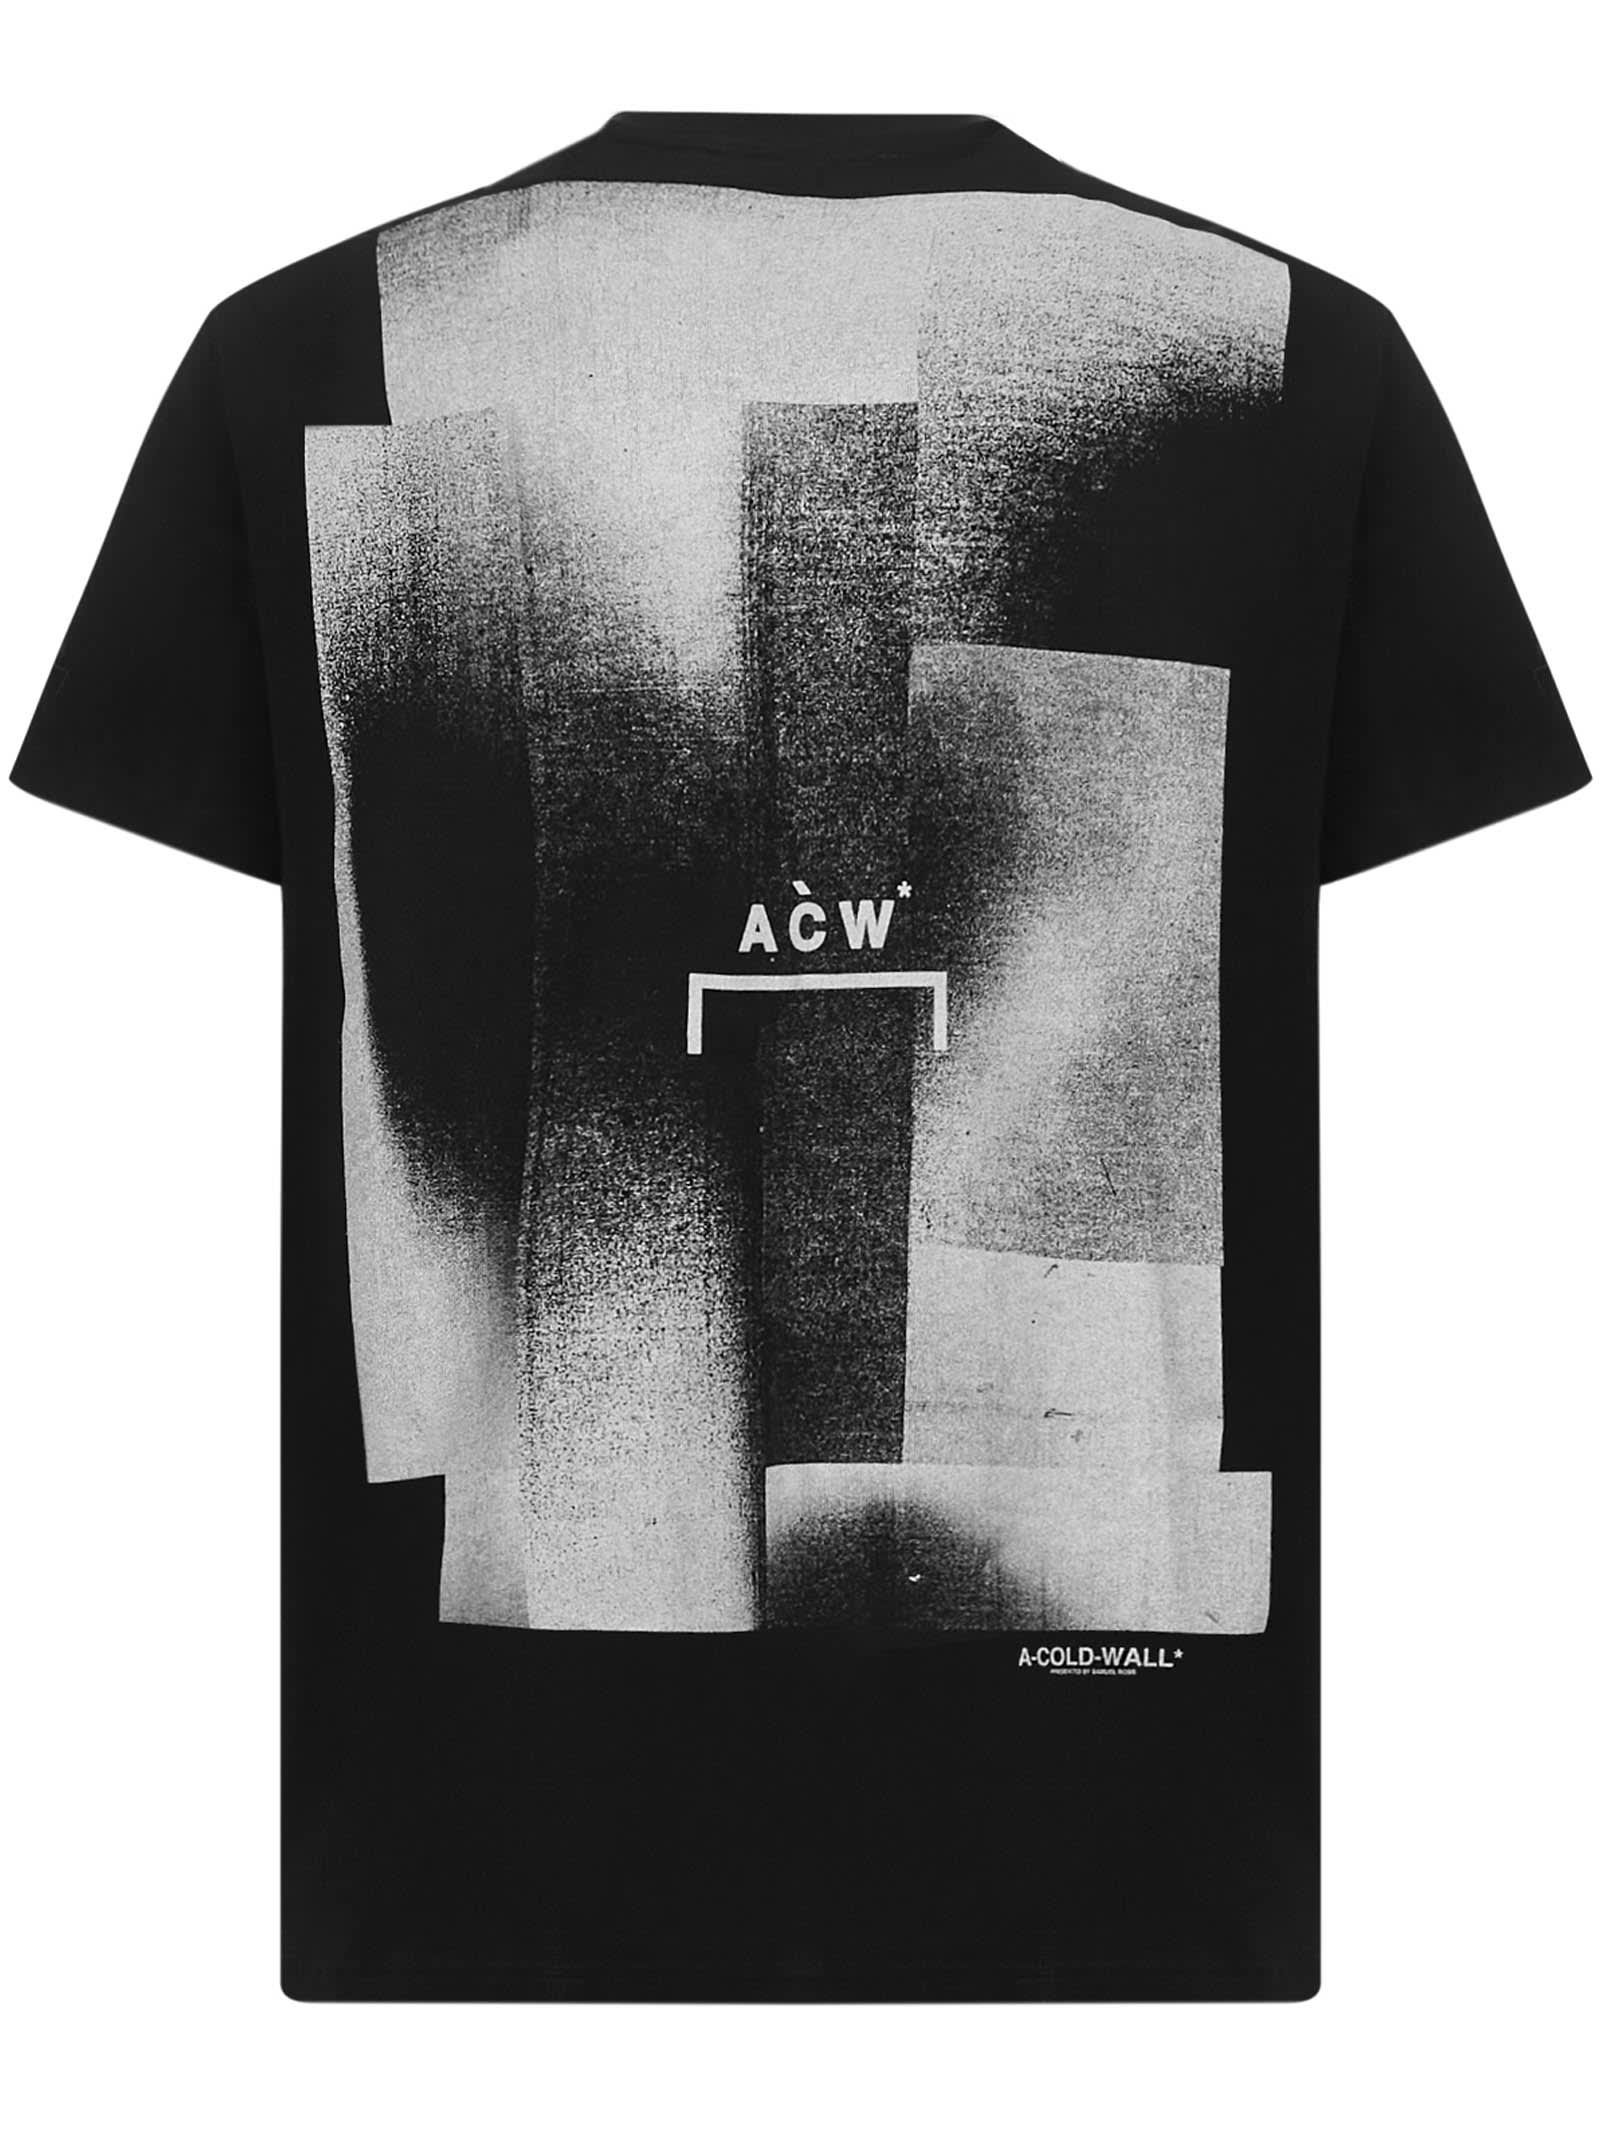 A-COLD-WALL* A COLD WALL T-SHIRT,ACWMTS039 BLACK